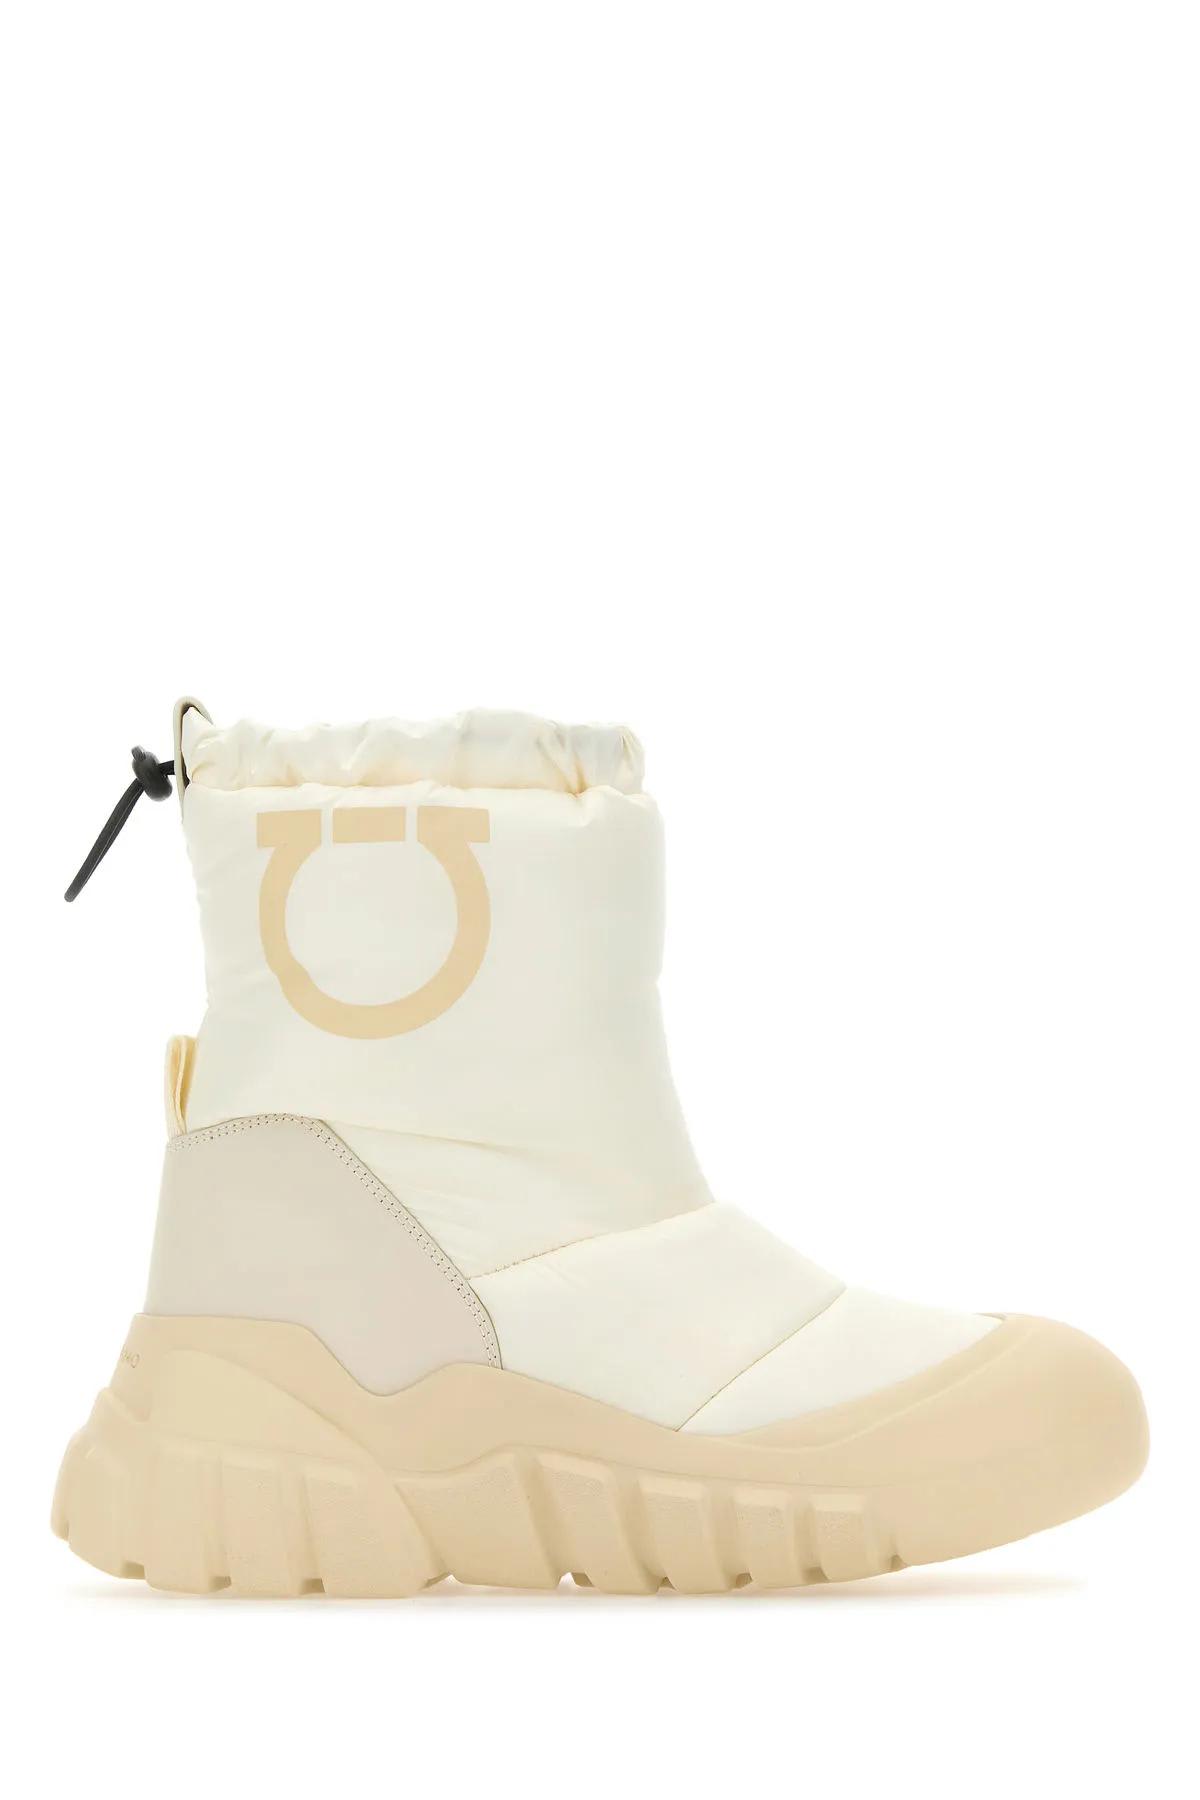 FERRAGAMO IVORY FABRIC AND RUBBER ANKLE BOOTS